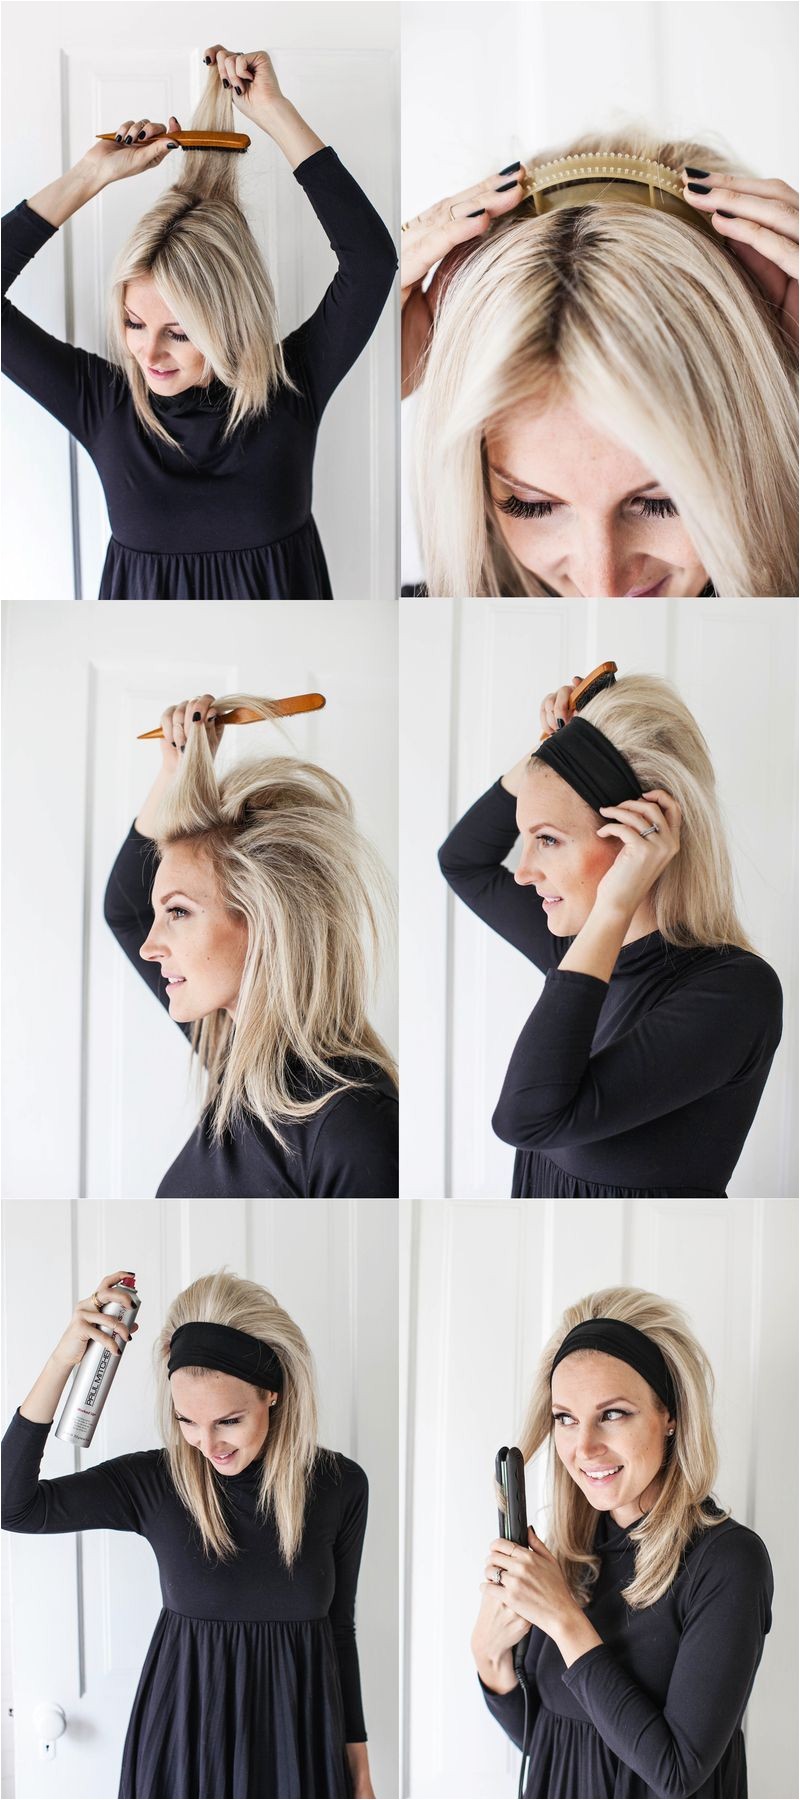 To help inspire your go to summer hairstyle click here to see our favorite hair tutorials from some of our favorite bloggers